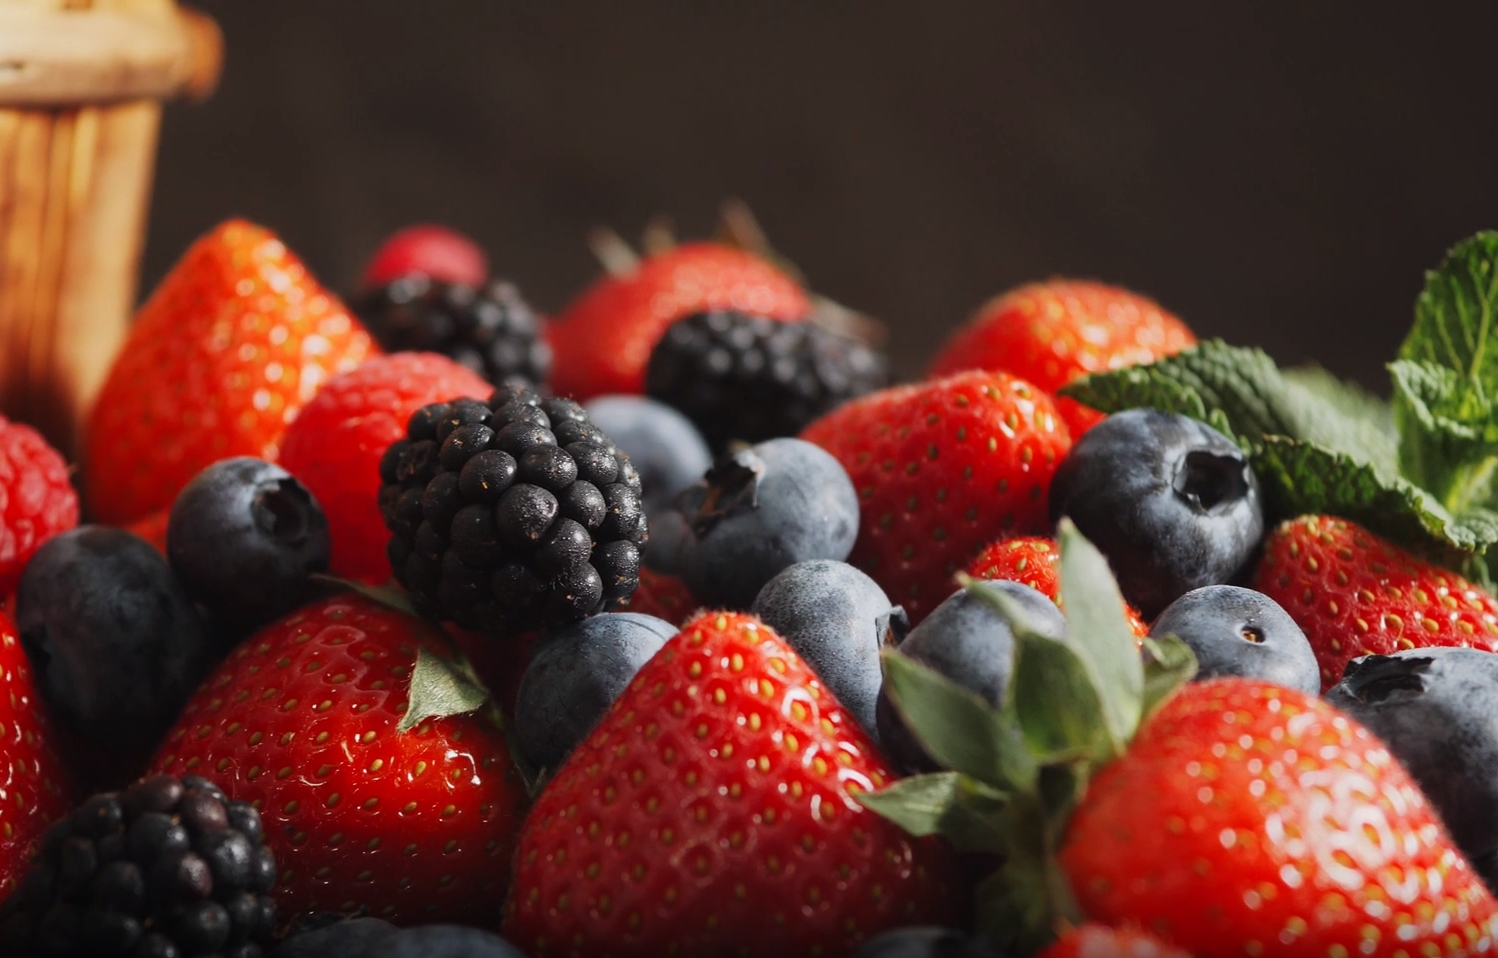 Fruits and Vegetables High in Antioxidants